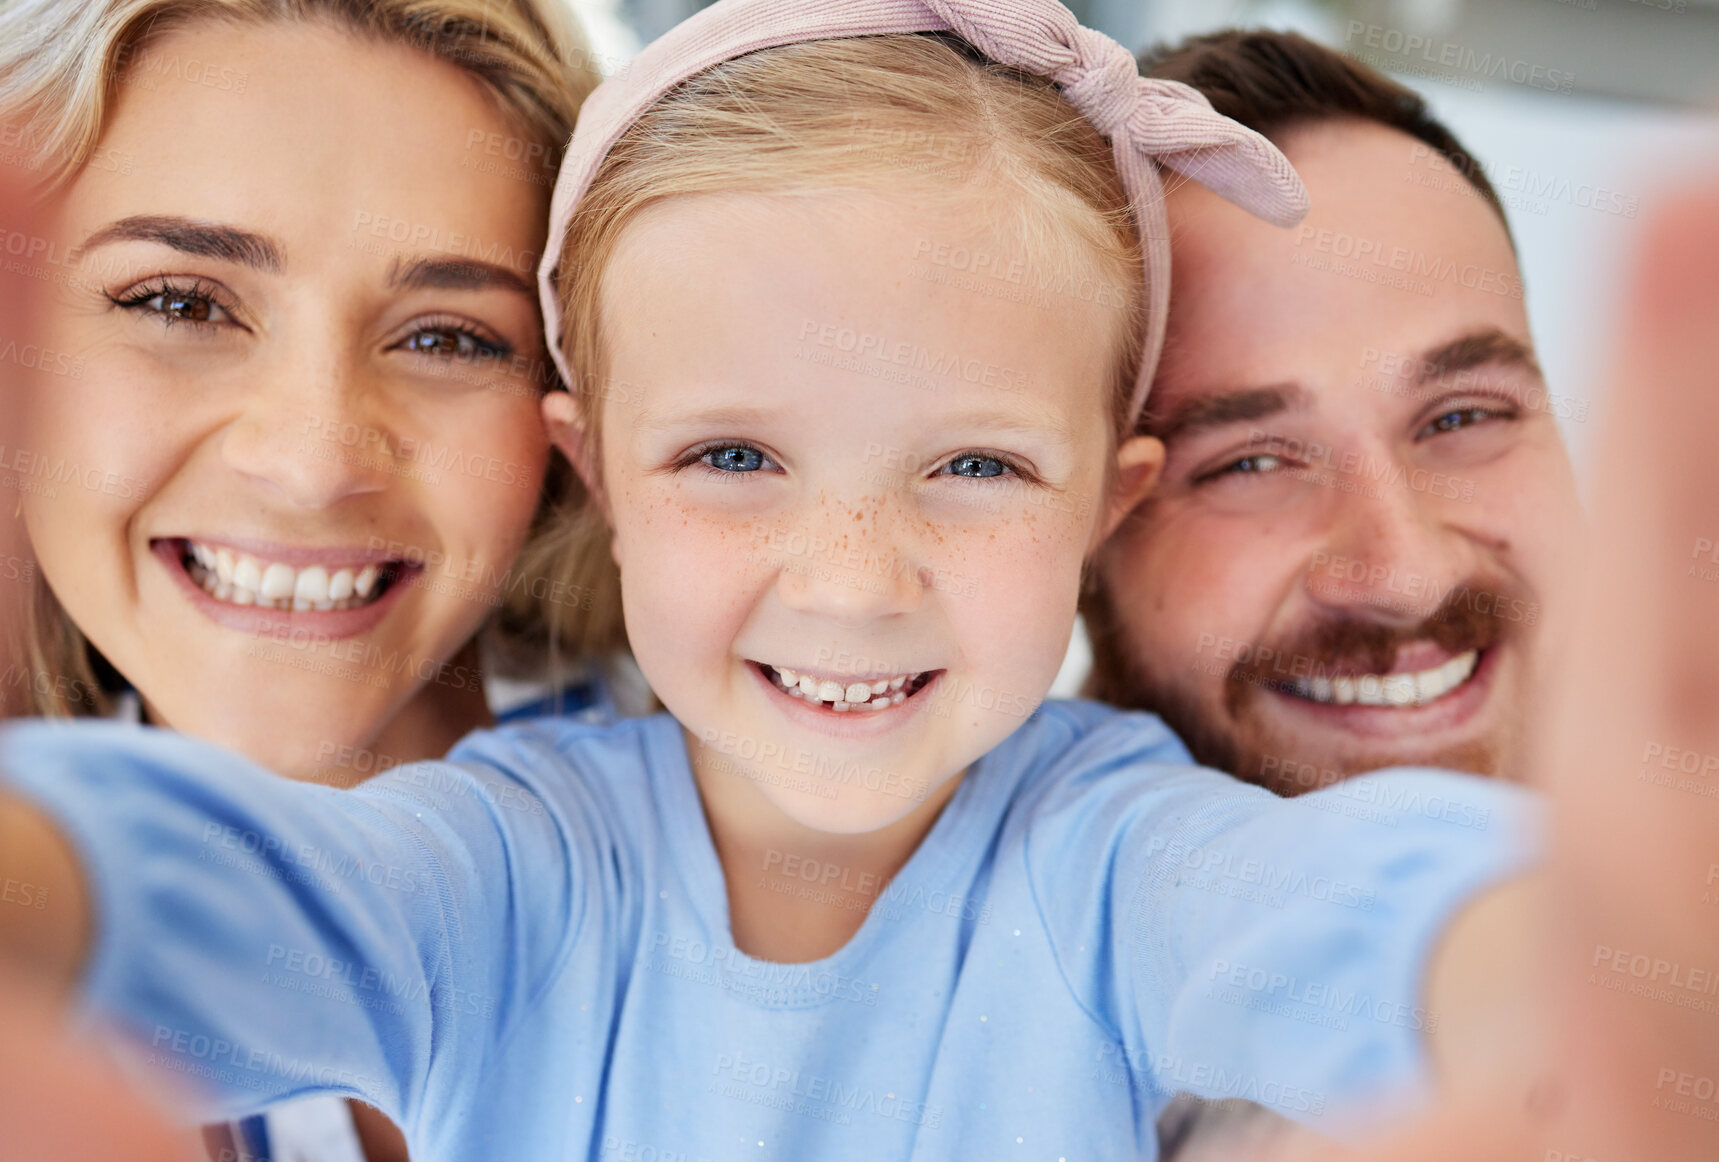 Buy stock photo Closeup of adorable little preschool girl taking selfie with her parents . Loving parents posing with their daughter for self-portrait picture.